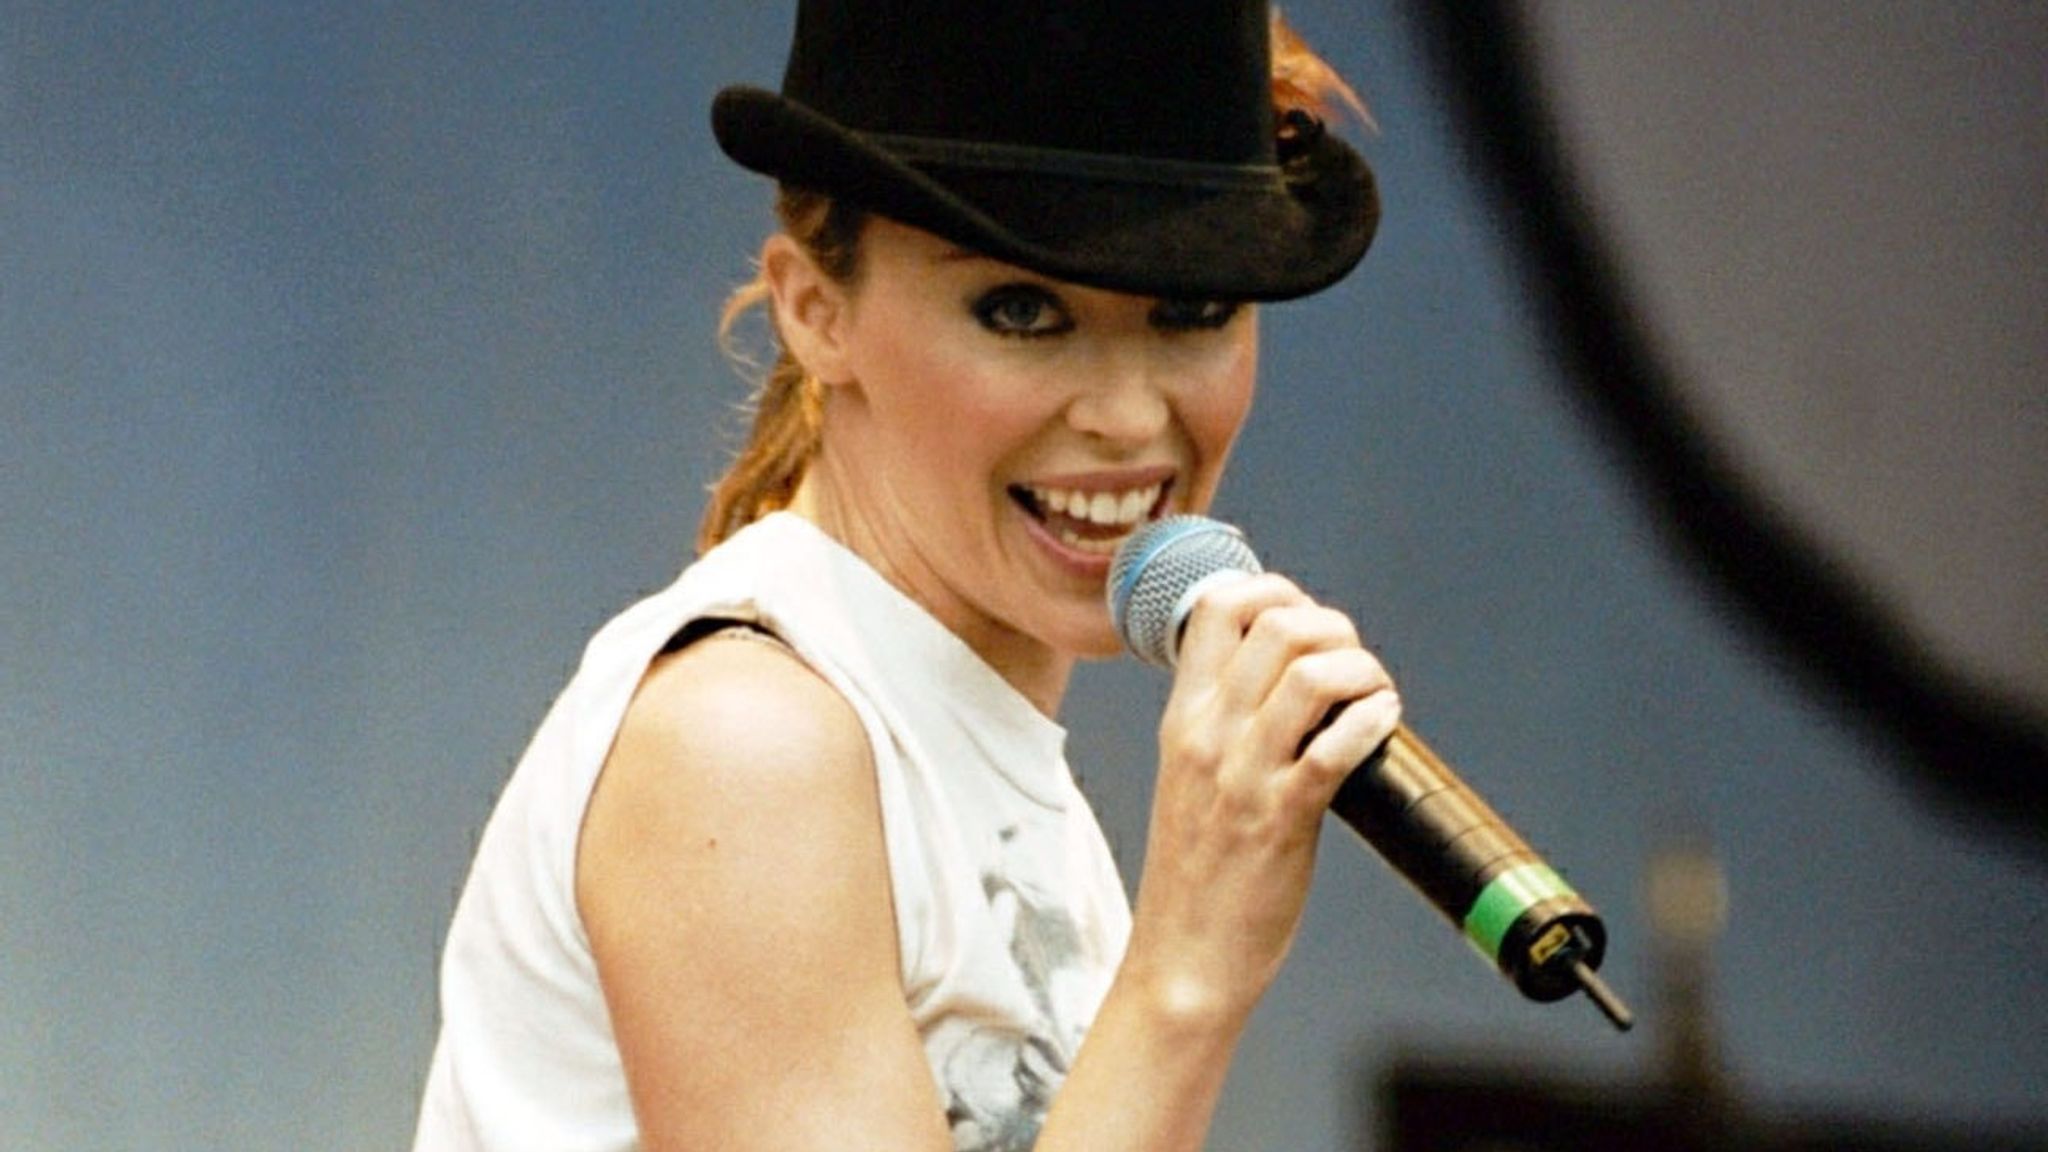 Australian singer Kylie Minogue on stage during the BBC Radio 1, One Big Sunday Music Festival held at Victoria Park, Leicester. * 02/09/2001 of Australian singer Kylie Minogue on stage during the BBC Radio 1, One Big Sunday Music Festival held at Victoria Park, Leicester.